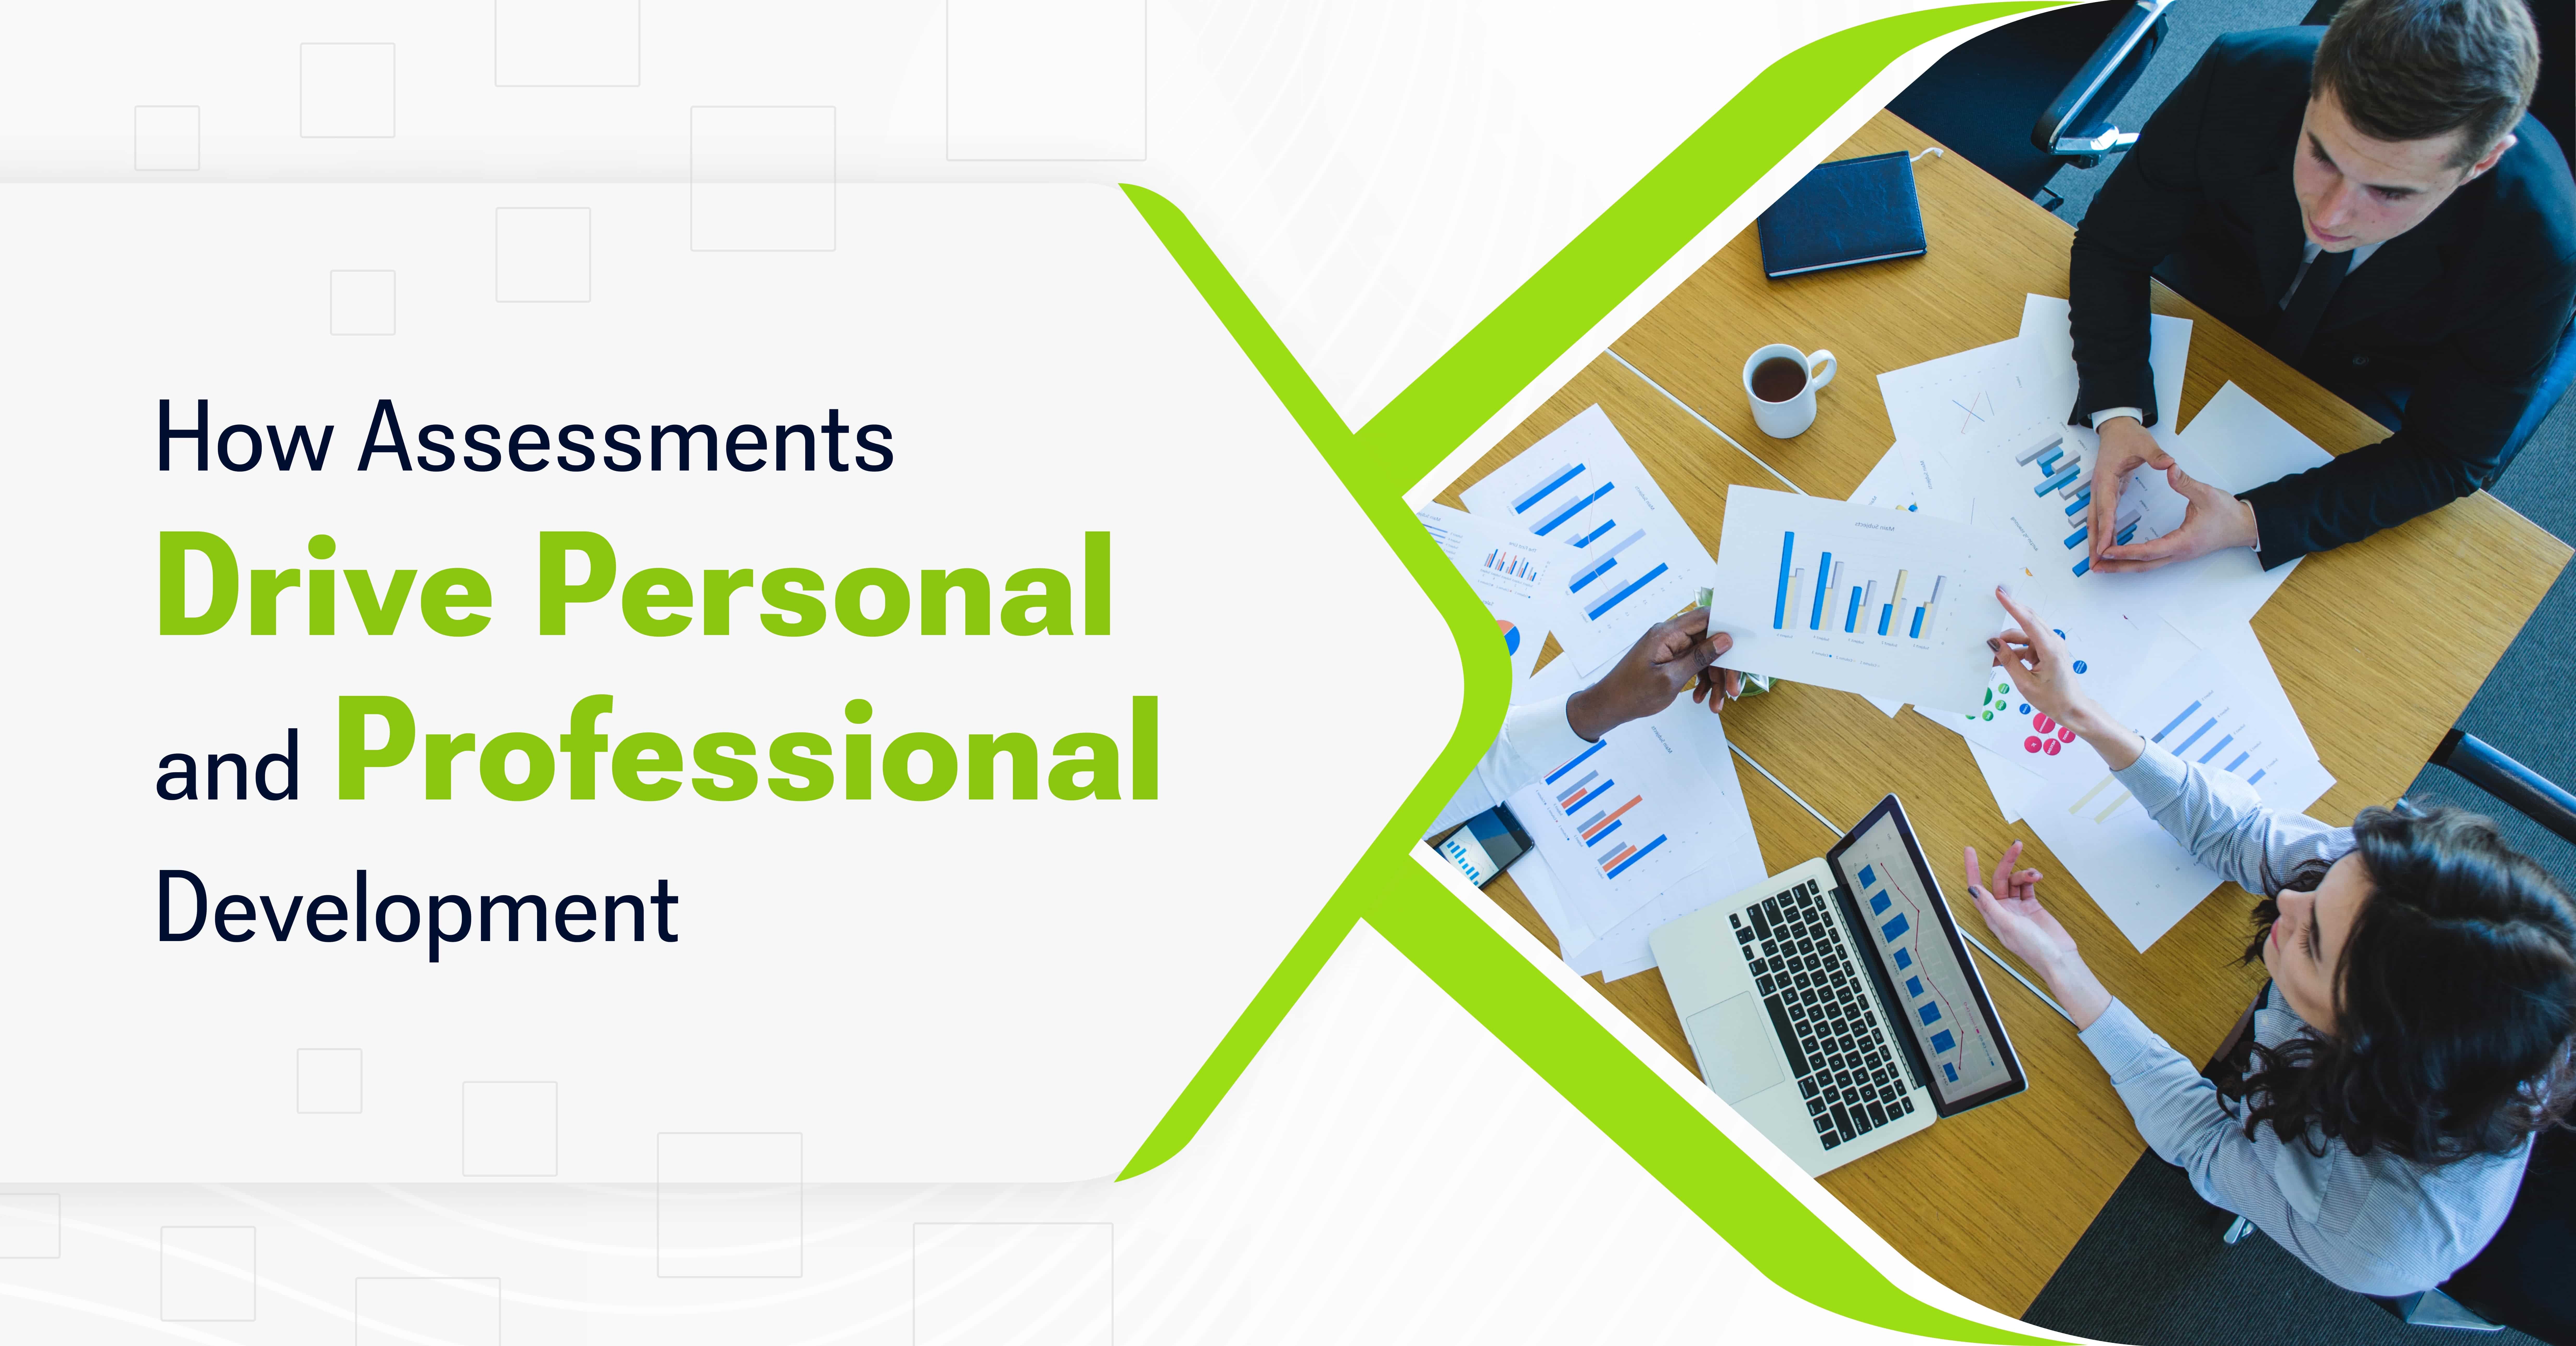 How Assessments Drive Personal and Professional Development